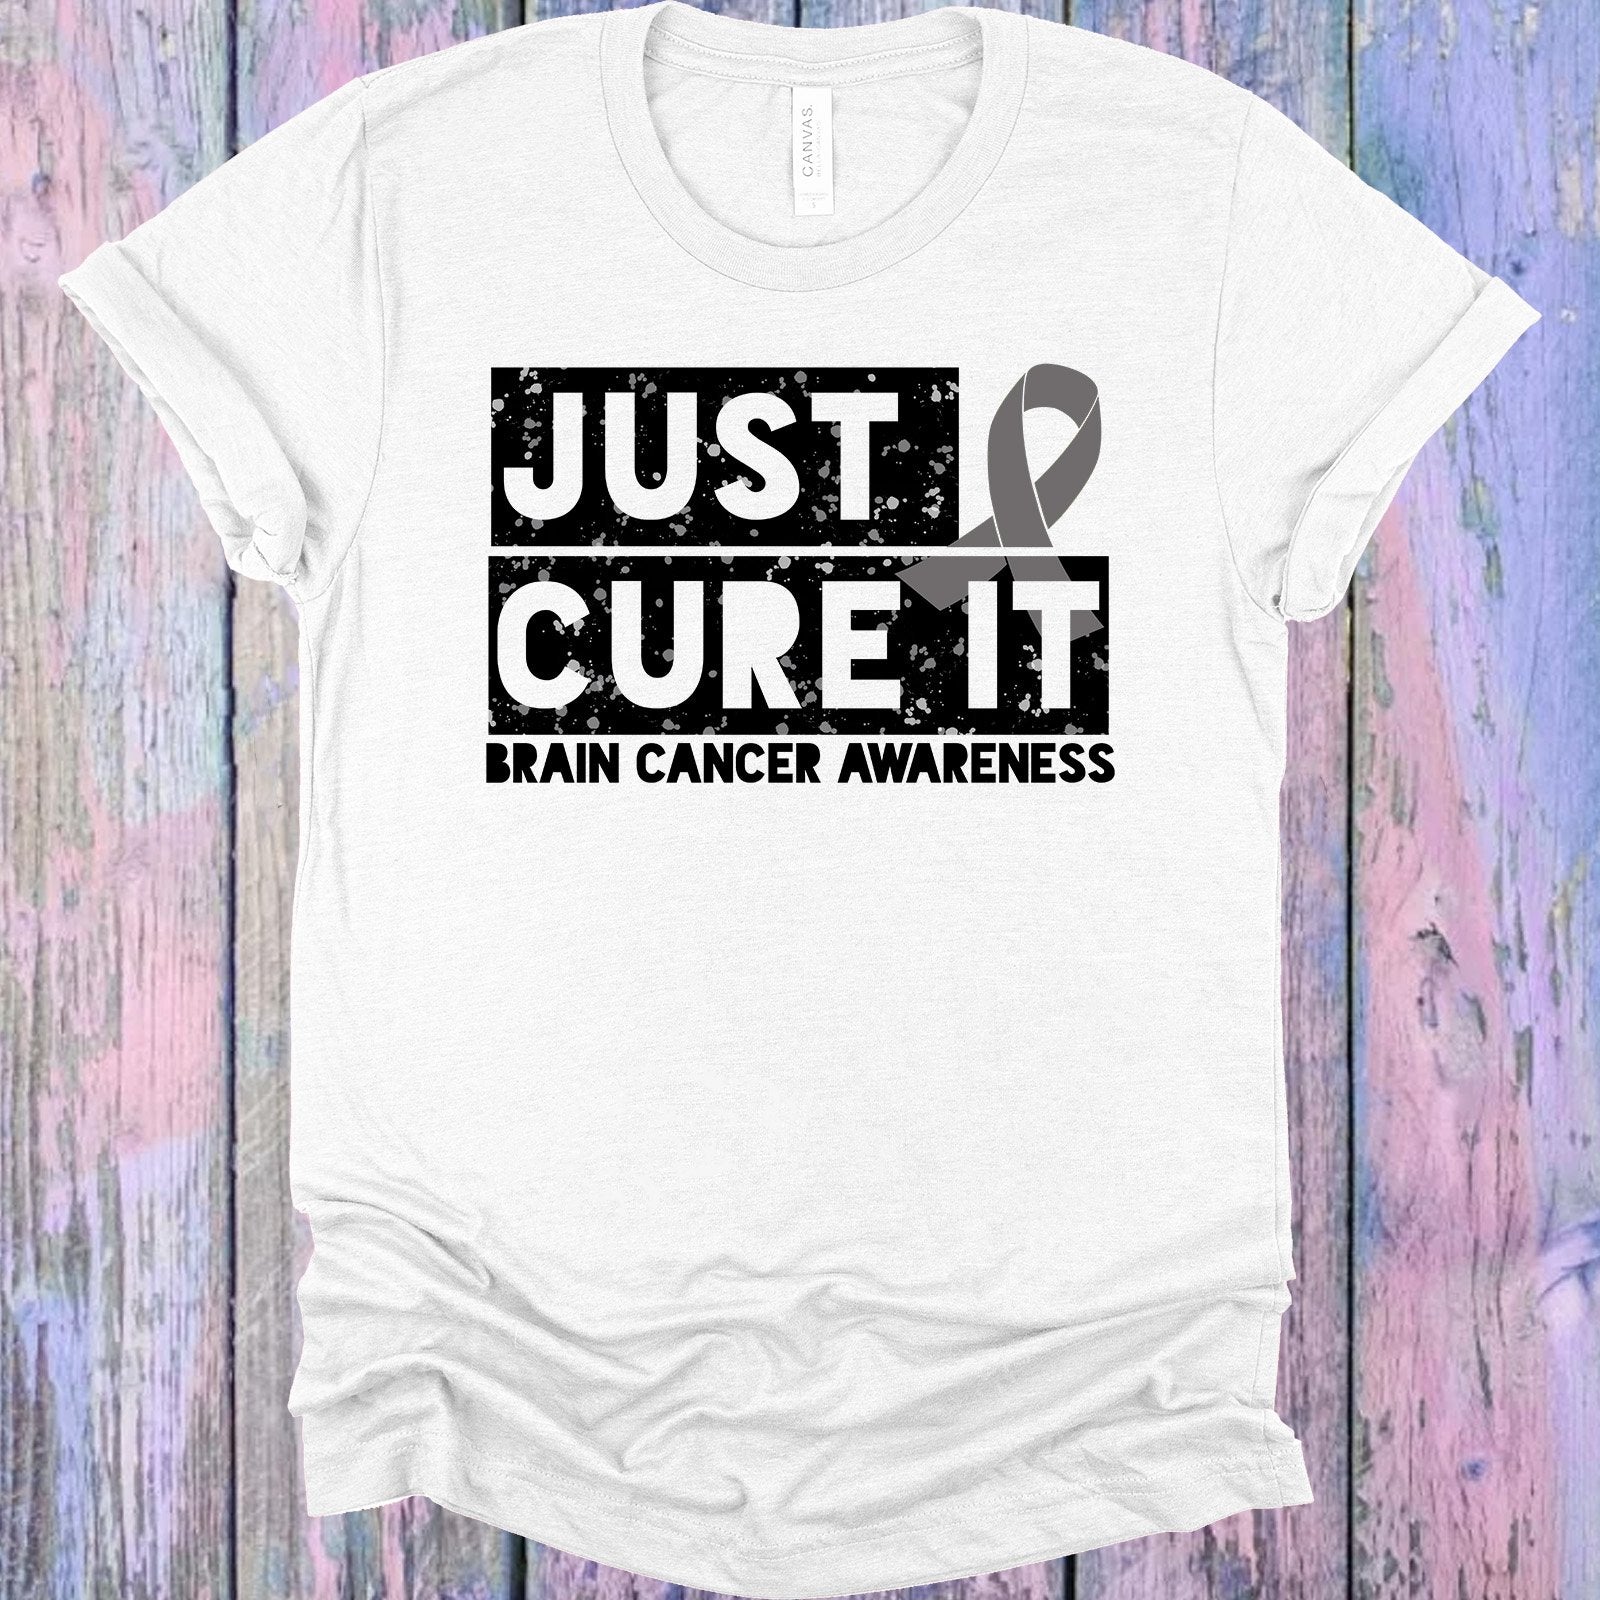 Just Cure It Brain Cancer Awareness Graphic Tee Graphic Tee